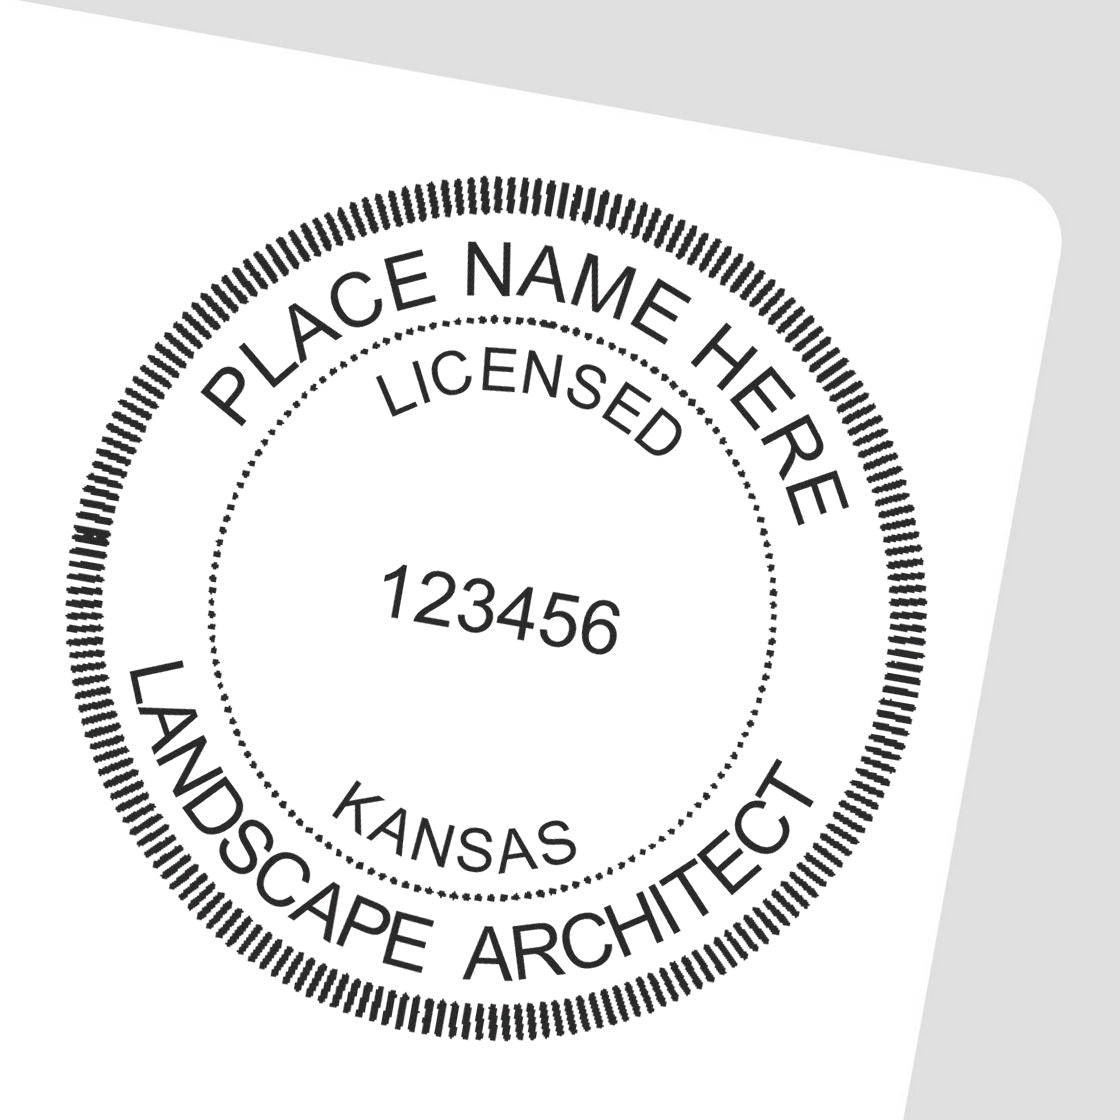 A stamped impression of the Digital Kansas Landscape Architect Stamp in this stylish lifestyle photo, setting the tone for a unique and personalized product.